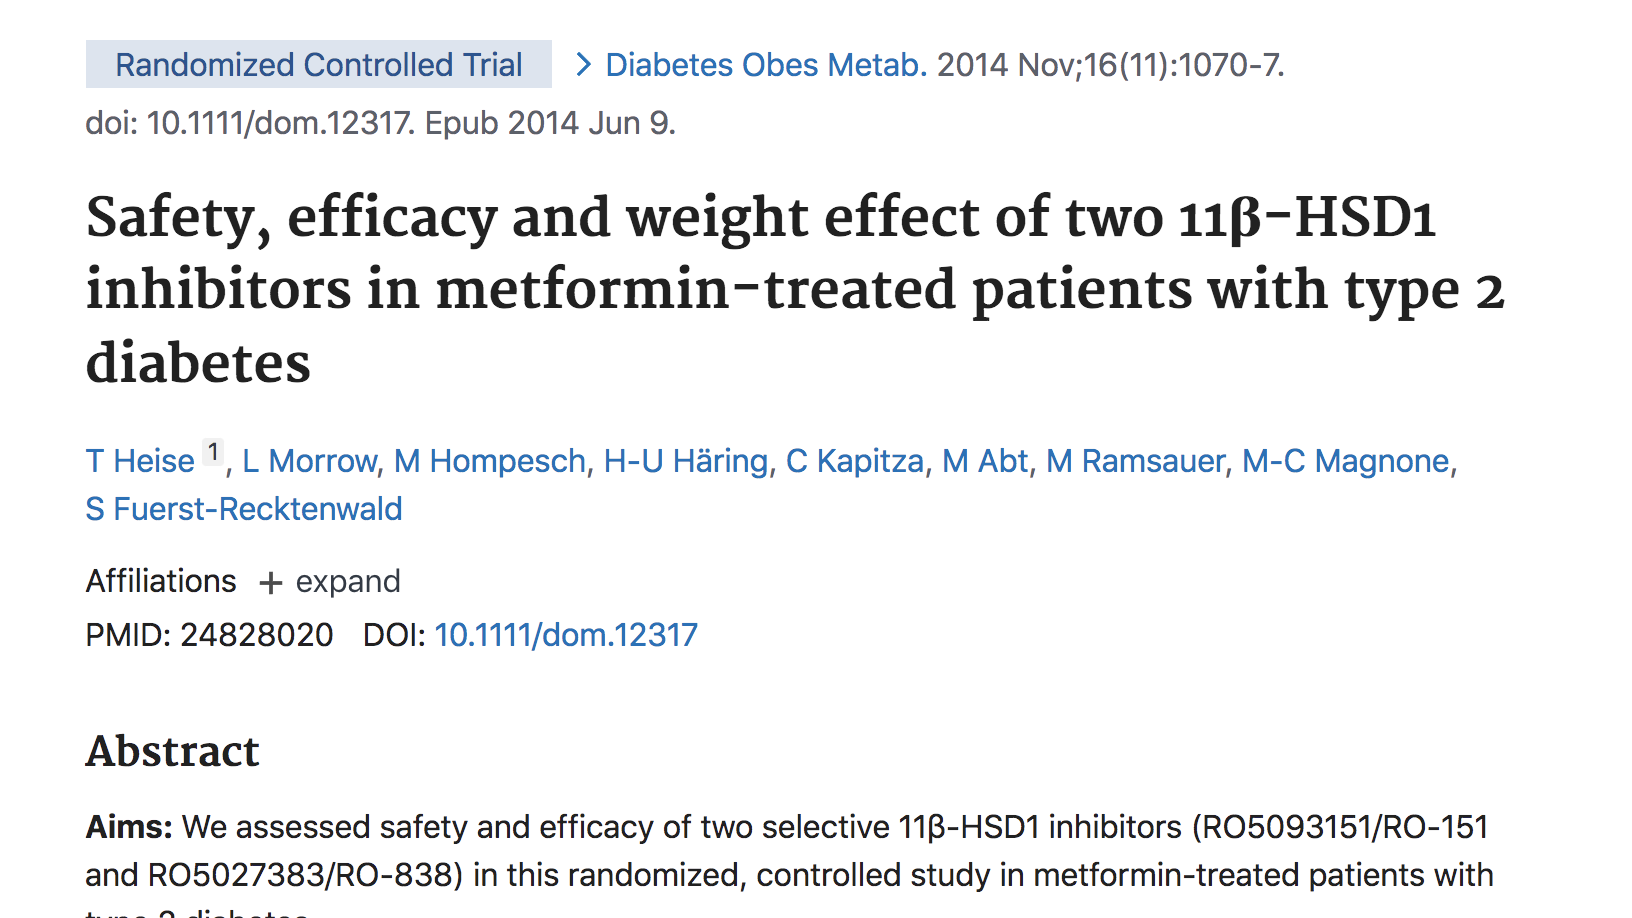 image of Safety, efficacy and weight effect of two 11β-HSD1 inhibitors in metformin-treated patients with type 2 diabetes